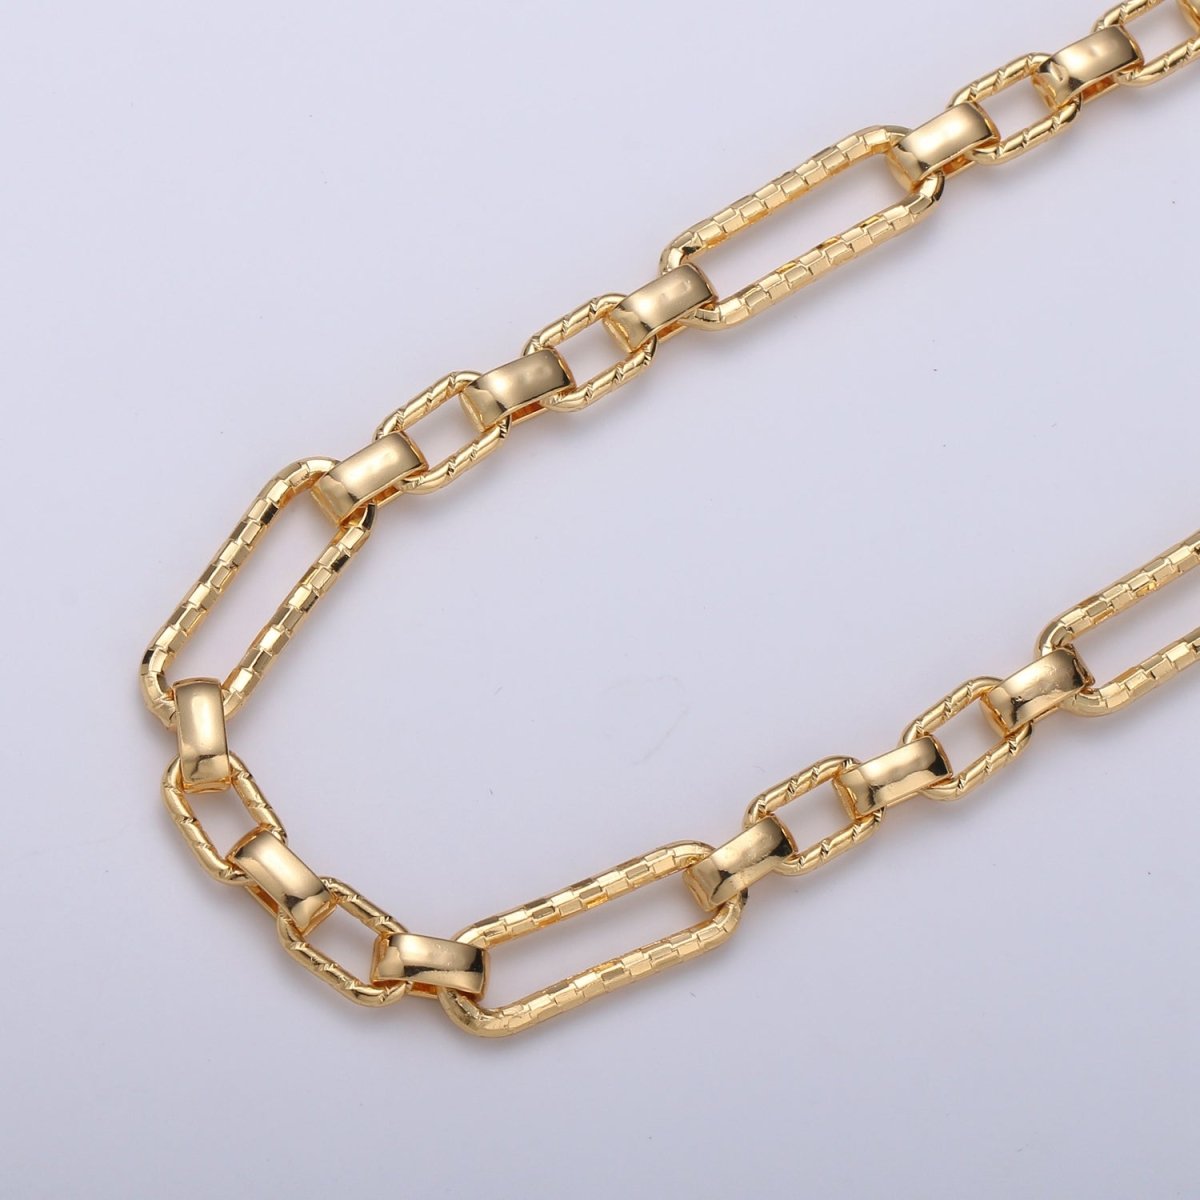 24K Gold Filled Chain By Yard, Long and short Fancy Chain By Yard, Wholesale Roll Chain For Jewelry Making | ROLL-370 Clearance Pricing - DLUXCA